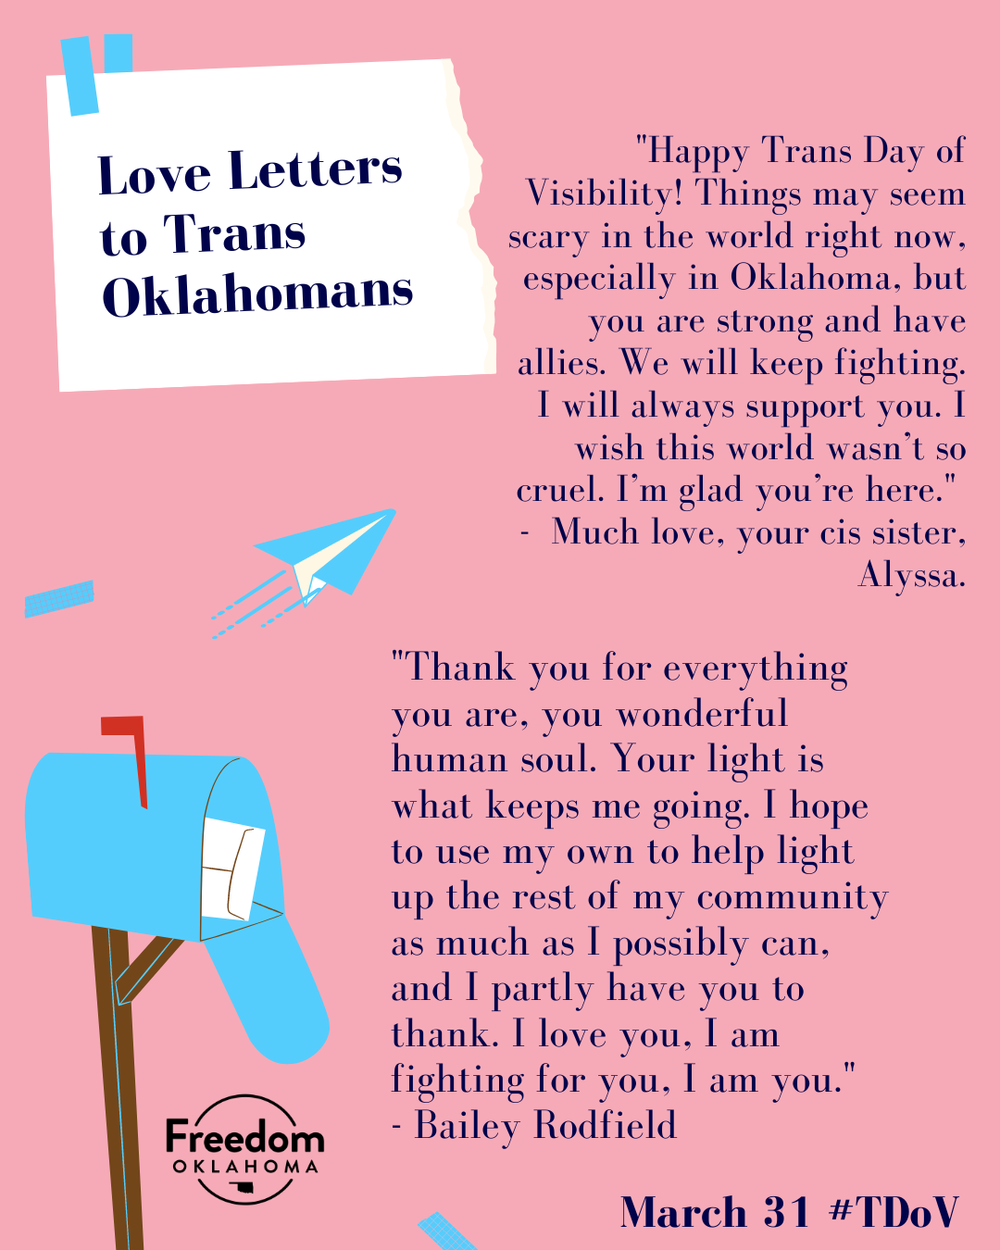  Similar pink graphic but with the text for 2 love letters. #1: "Happy Trans Day of Visibility! Things may seem scary in the world right now, especially in Oklahoma, but you are strong and have allies. We will keep fighting. I will always support you